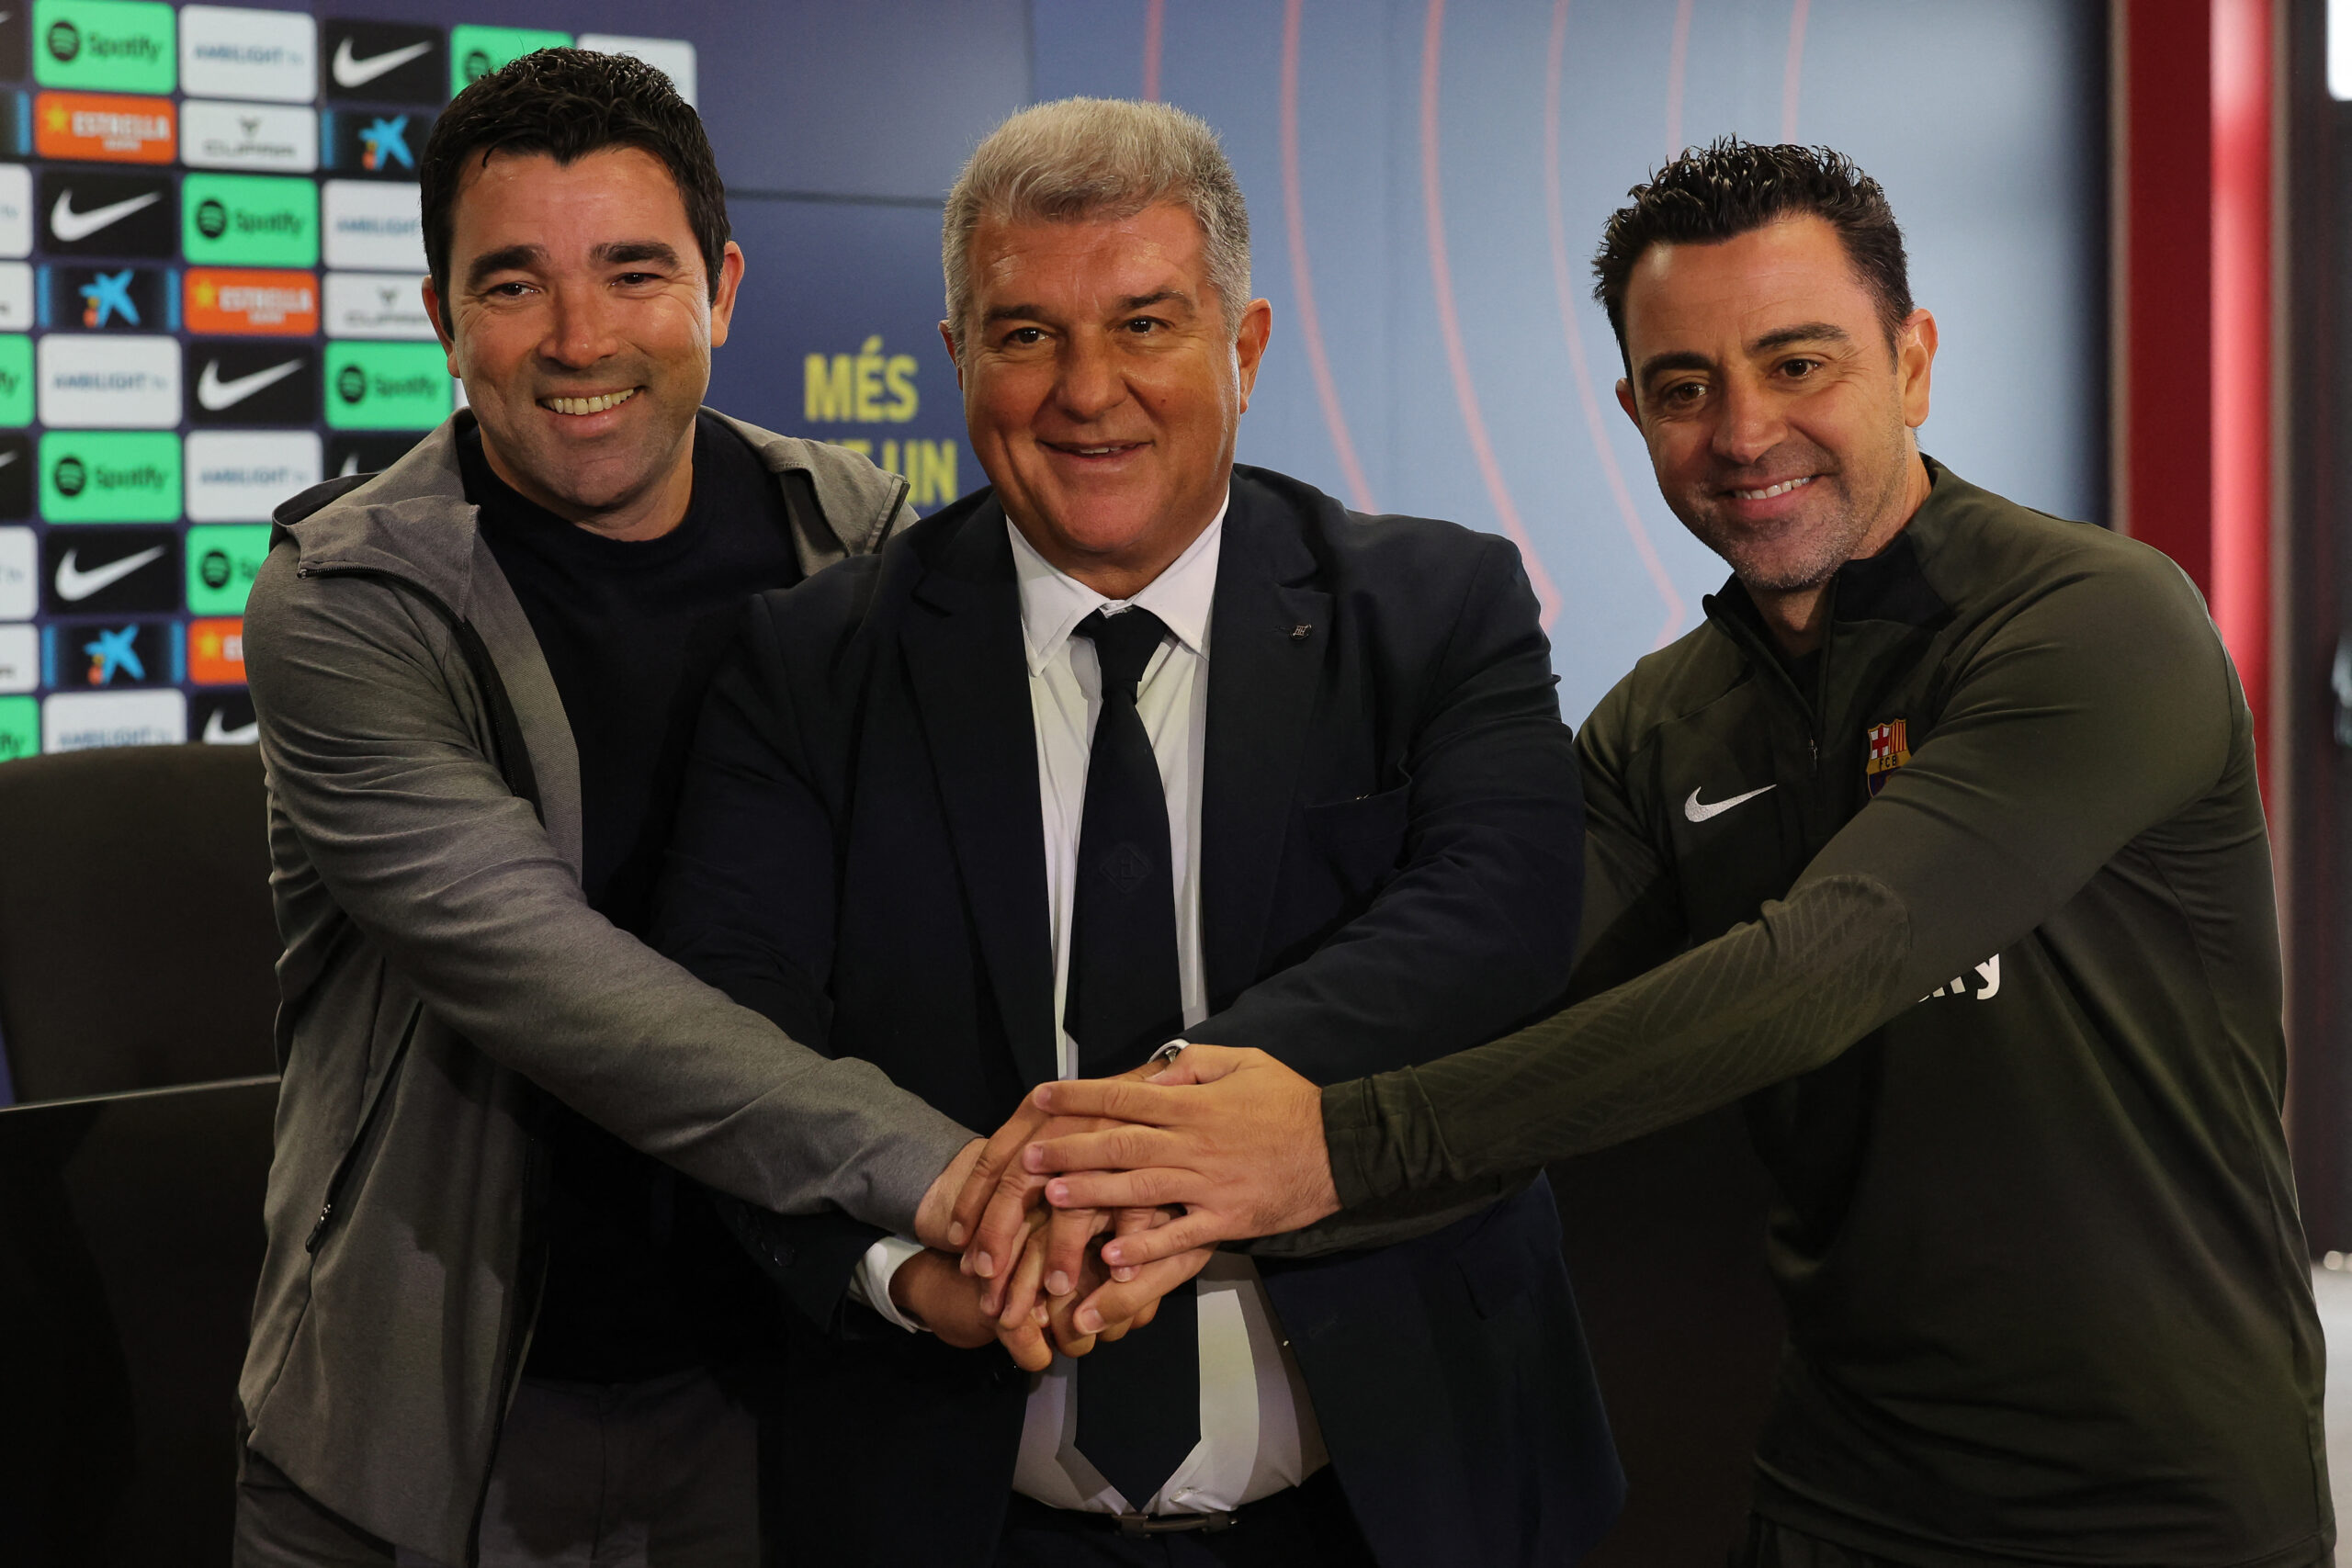 TOPSHOT - (From L) Barcelona's Sports Director Anderson de Souza "Deco", FC Barcelona President Joan Laporta and Barcelona's Spanish coach Xavi pose for pictures before a press conference at the Joan Gamper training ground in Sant Joan Despi, near Barcelona, on April 25, 2024. Xavi will remain as coach of Barcelona, the Spanish giants told AFP on April 24, despite having announced in January that he planned to quit at the end of the season due to the "cruel and unpleasant" nature of the job.